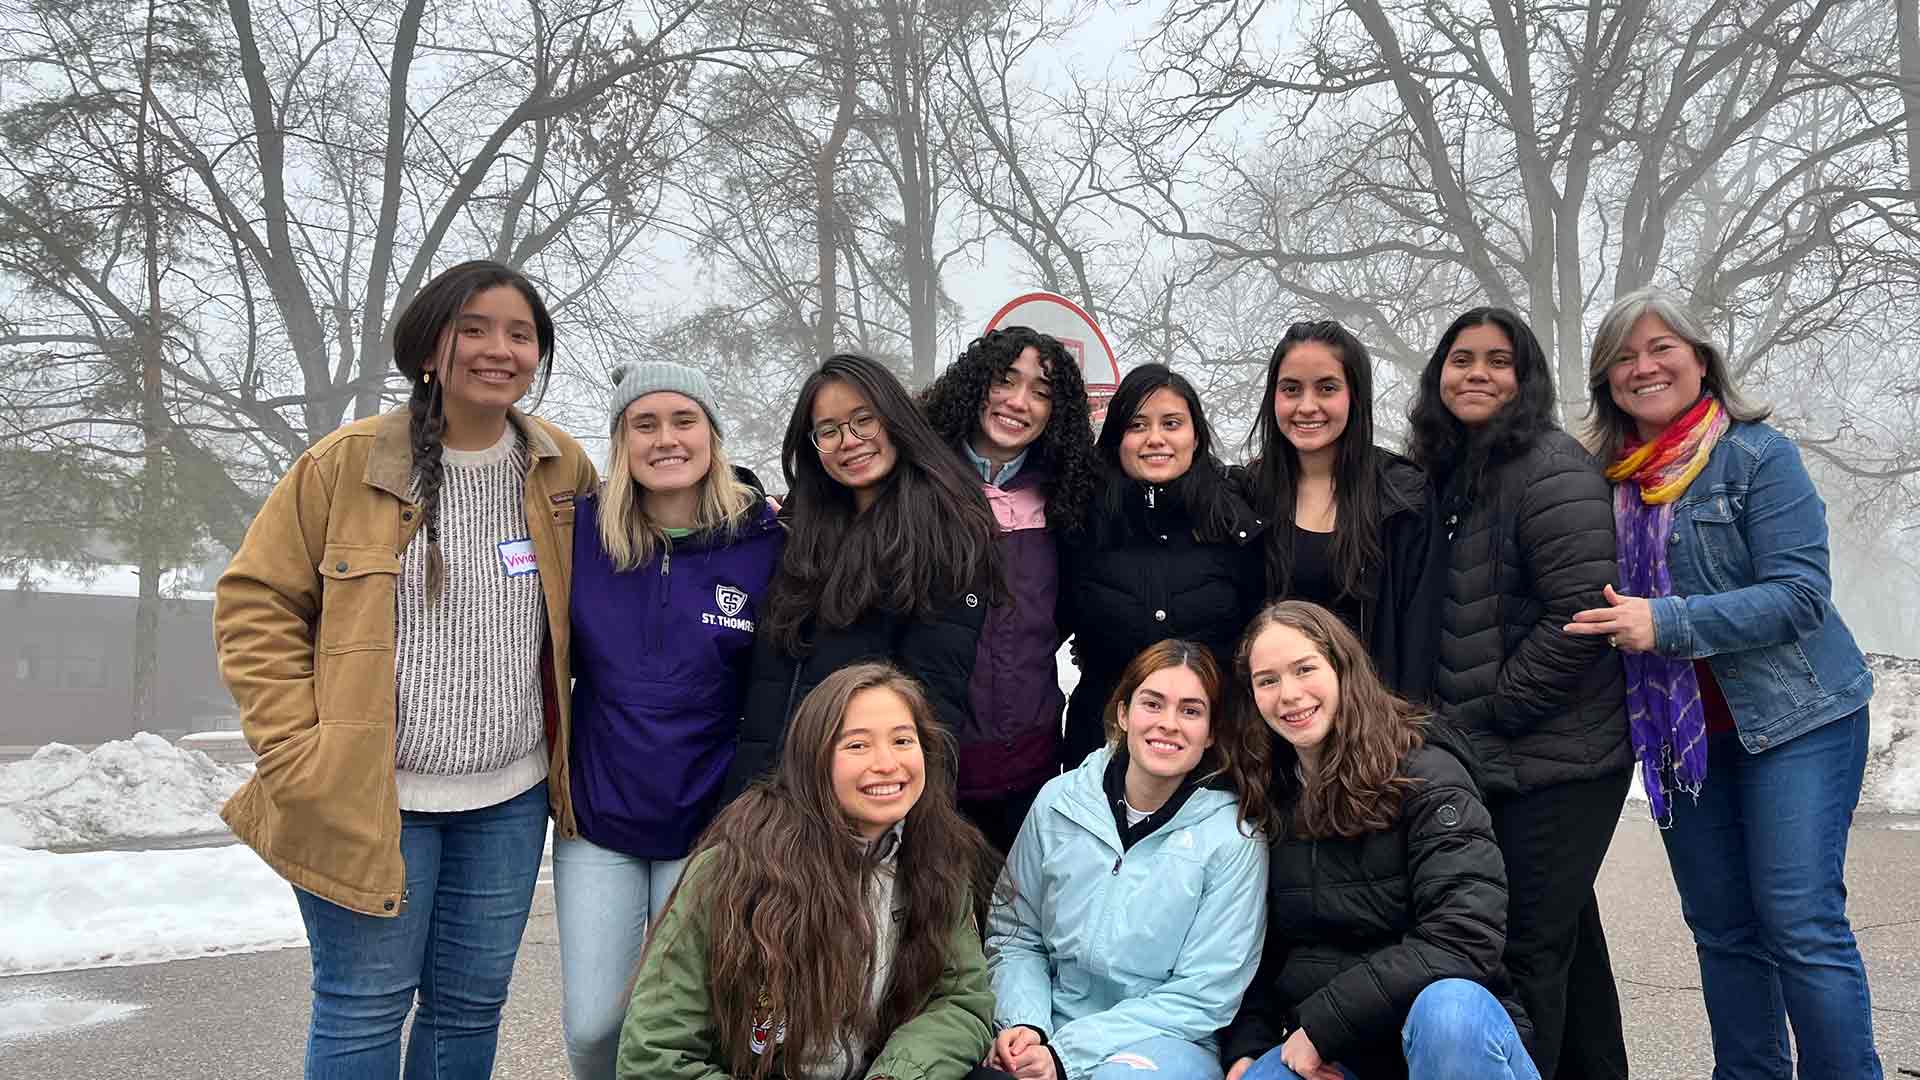 Students visit to the lady of guadalupe shrine in la crosse Wisconsin